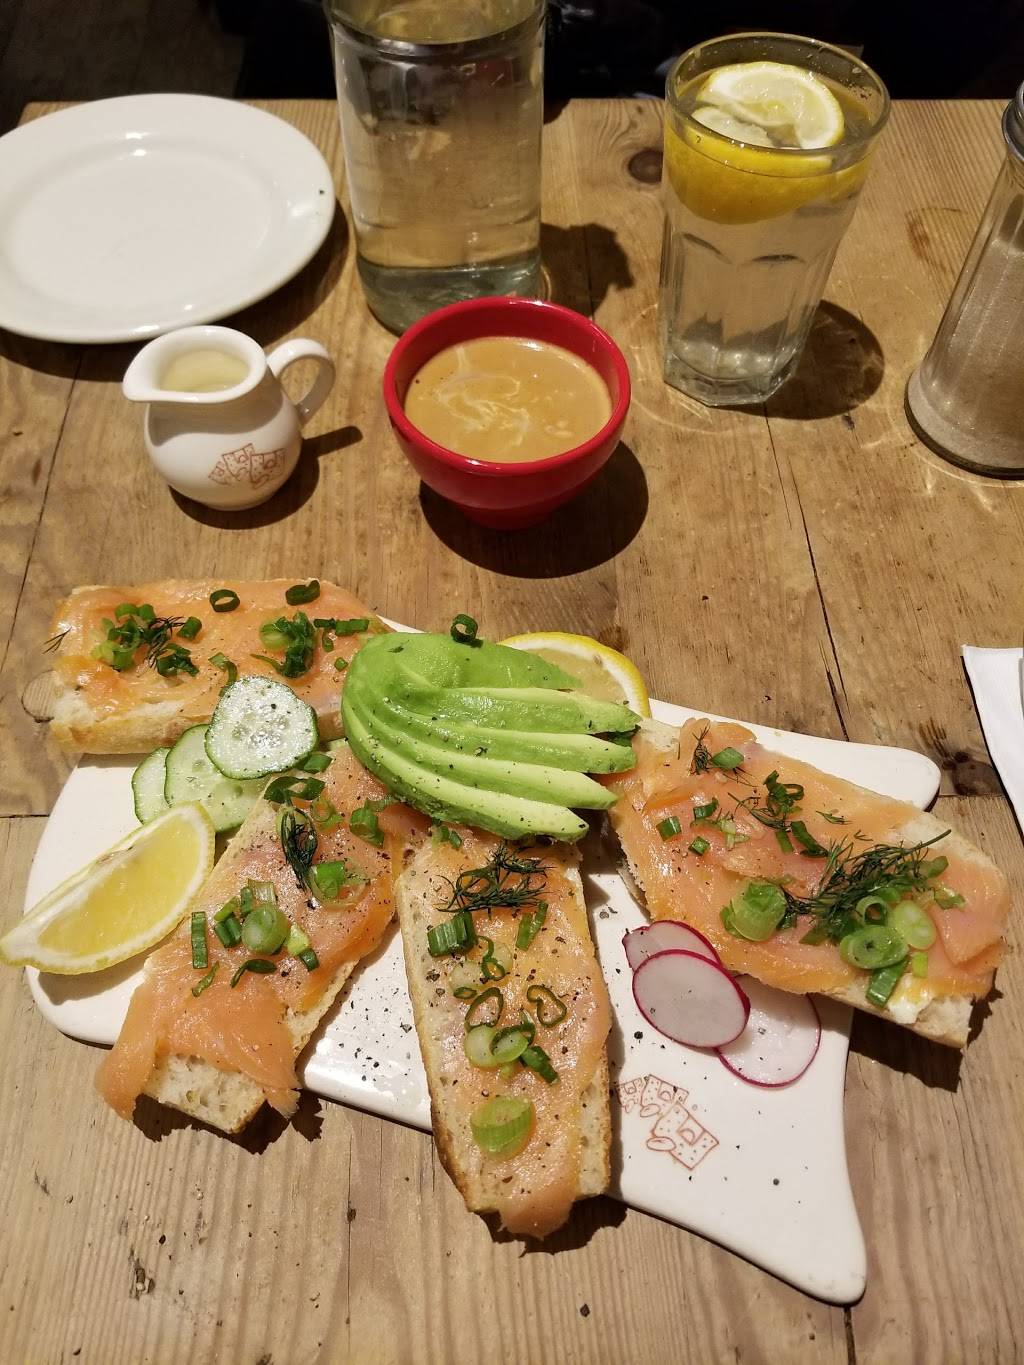 Le Pain Quotidien | restaurant | 1270 1st Avenue, New York, NY 10065, USA | 2129885001 OR +1 212-988-5001